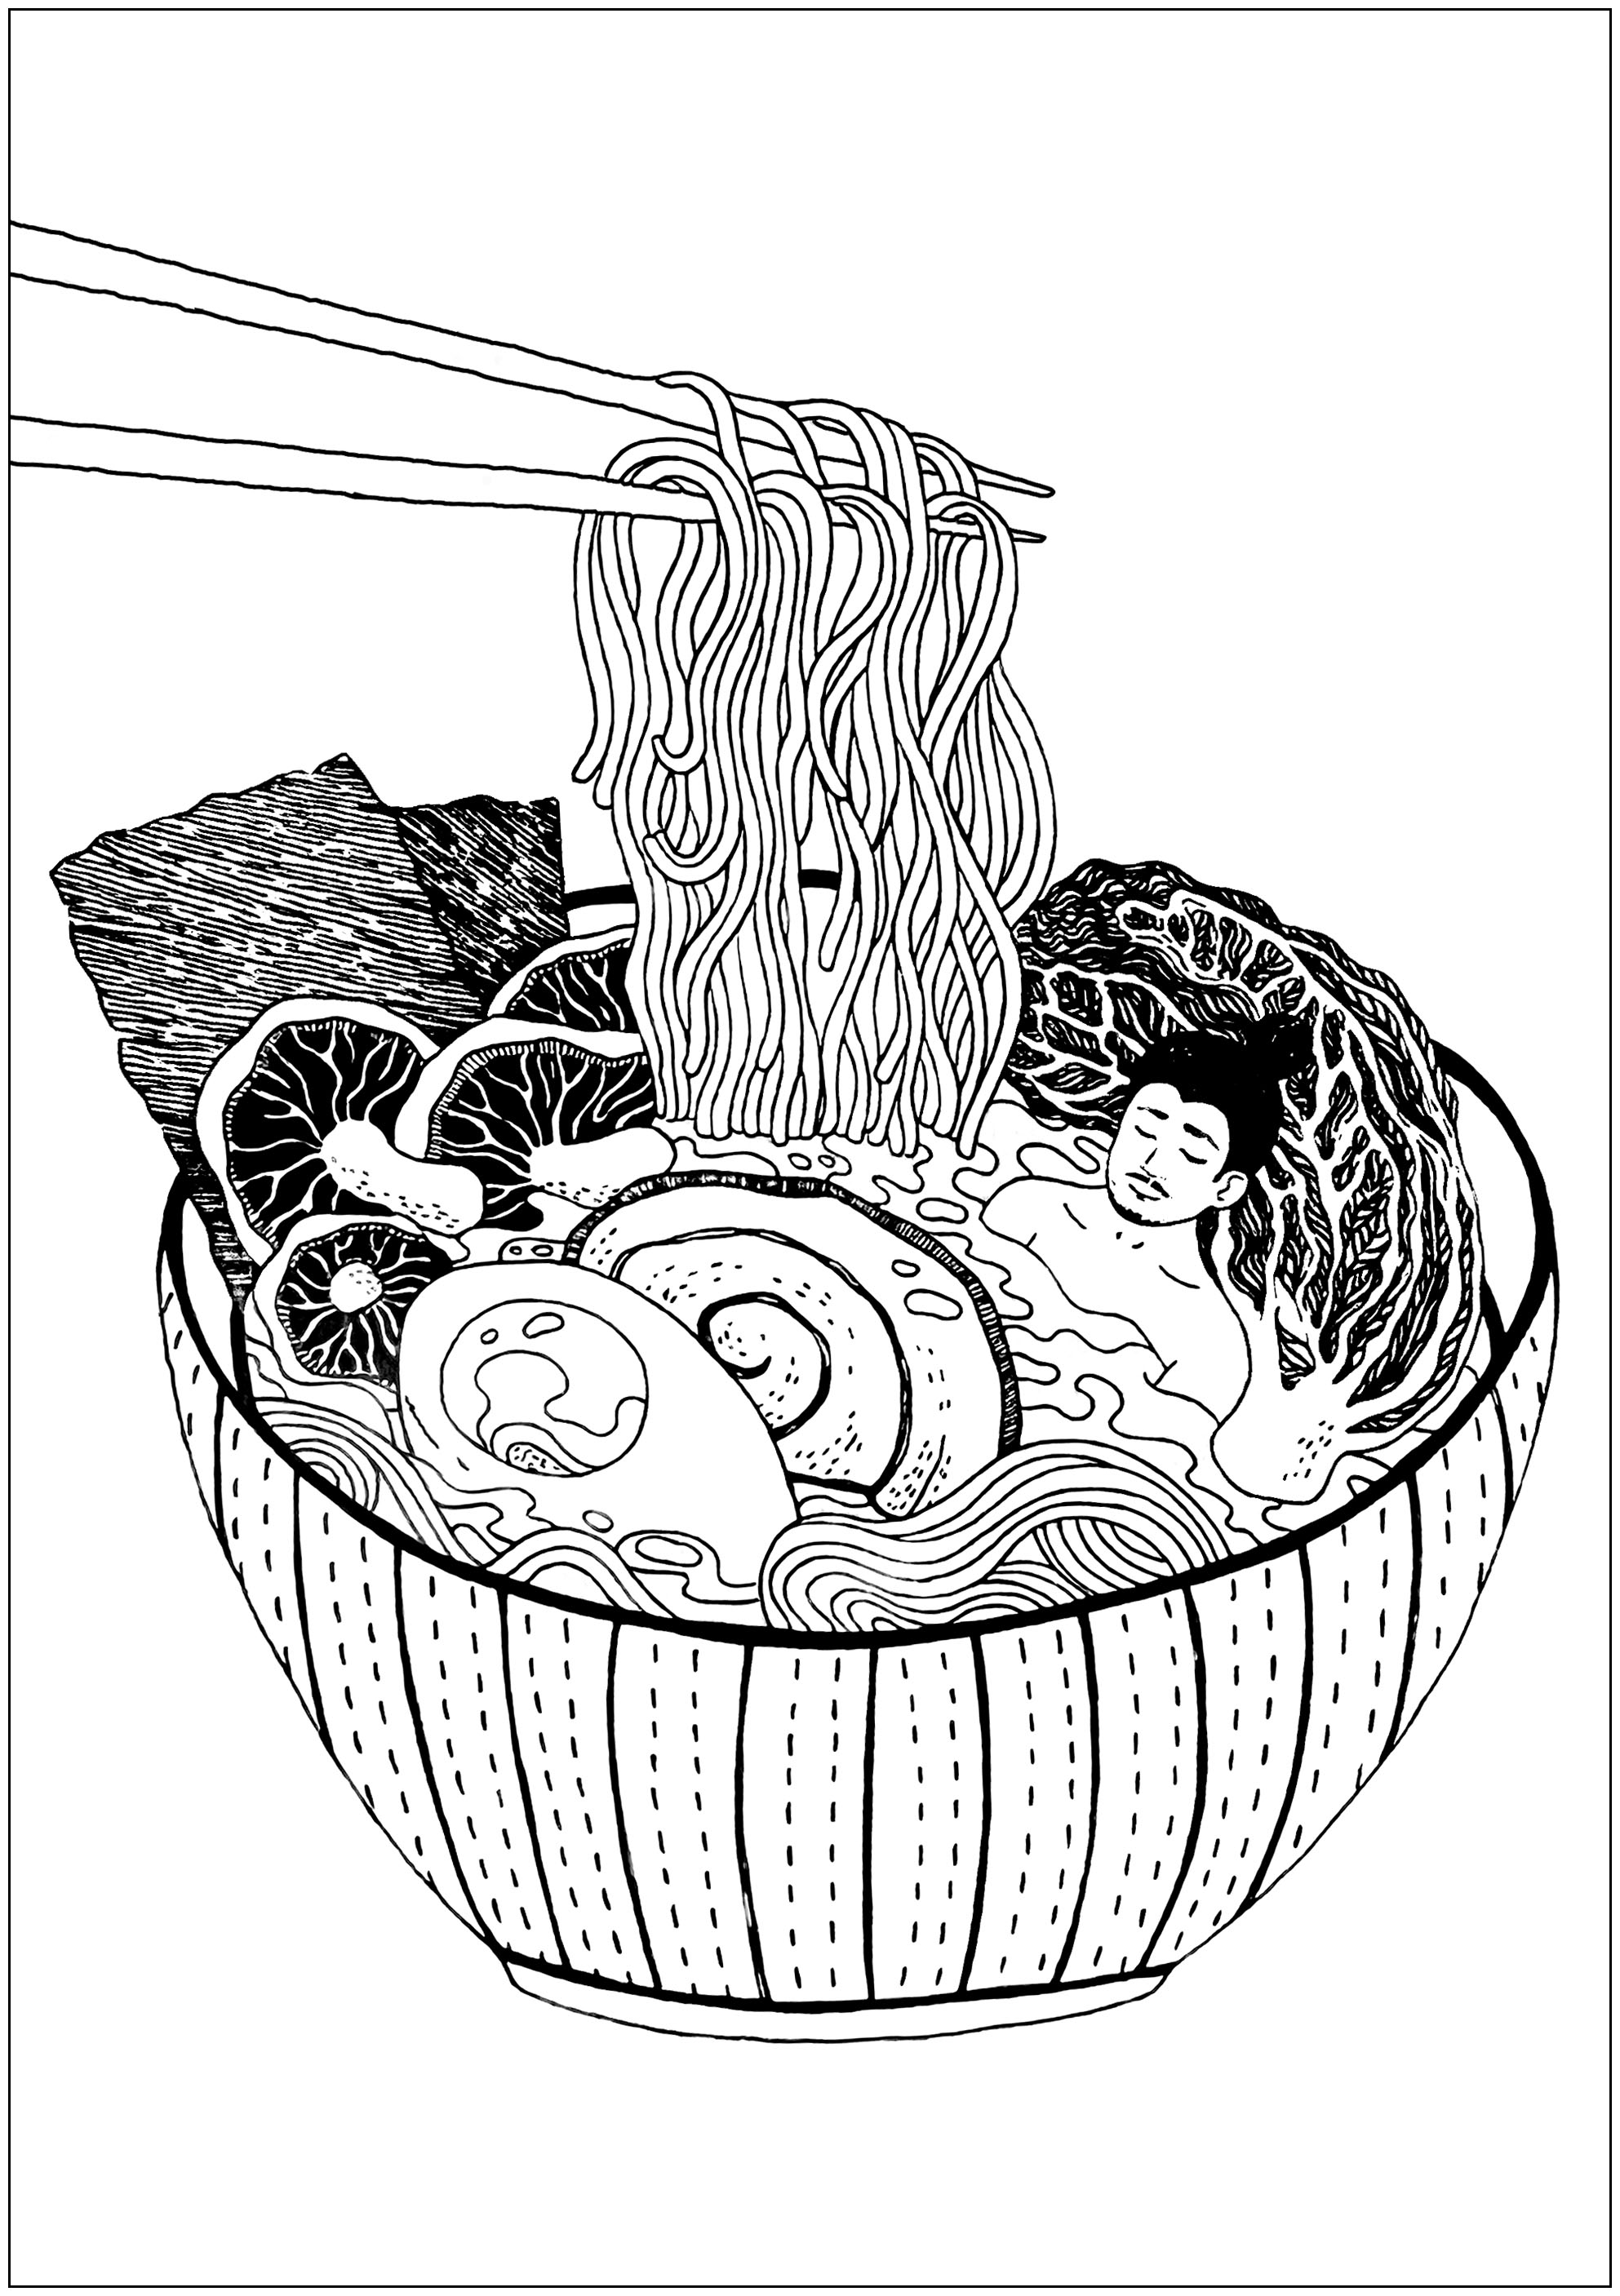 Man in a noodle bath. A man relaxes, sitting in the big bowl of ramen, the steaming hot water filling him to the brim as he relaxes and soaks up the heat. Steam rises from the surface of the water, enveloping the person in a comforting, noodle-scented mist.